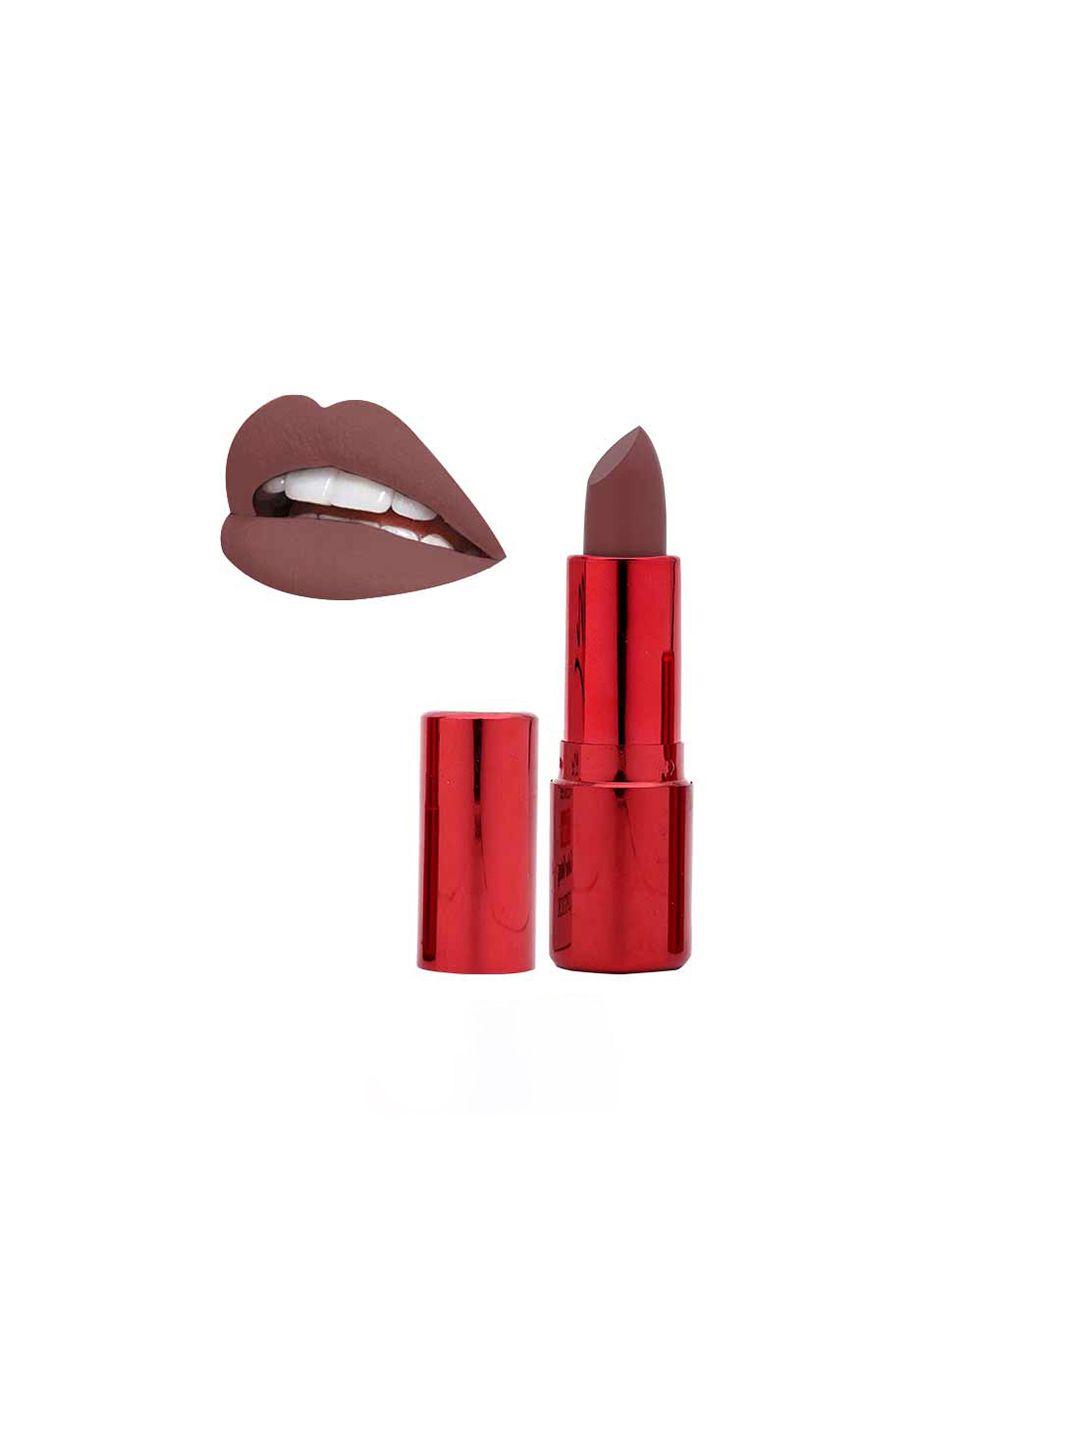 beautyrelay london 12 hour color stay lipstick with vitamin c 3.5g - redwood